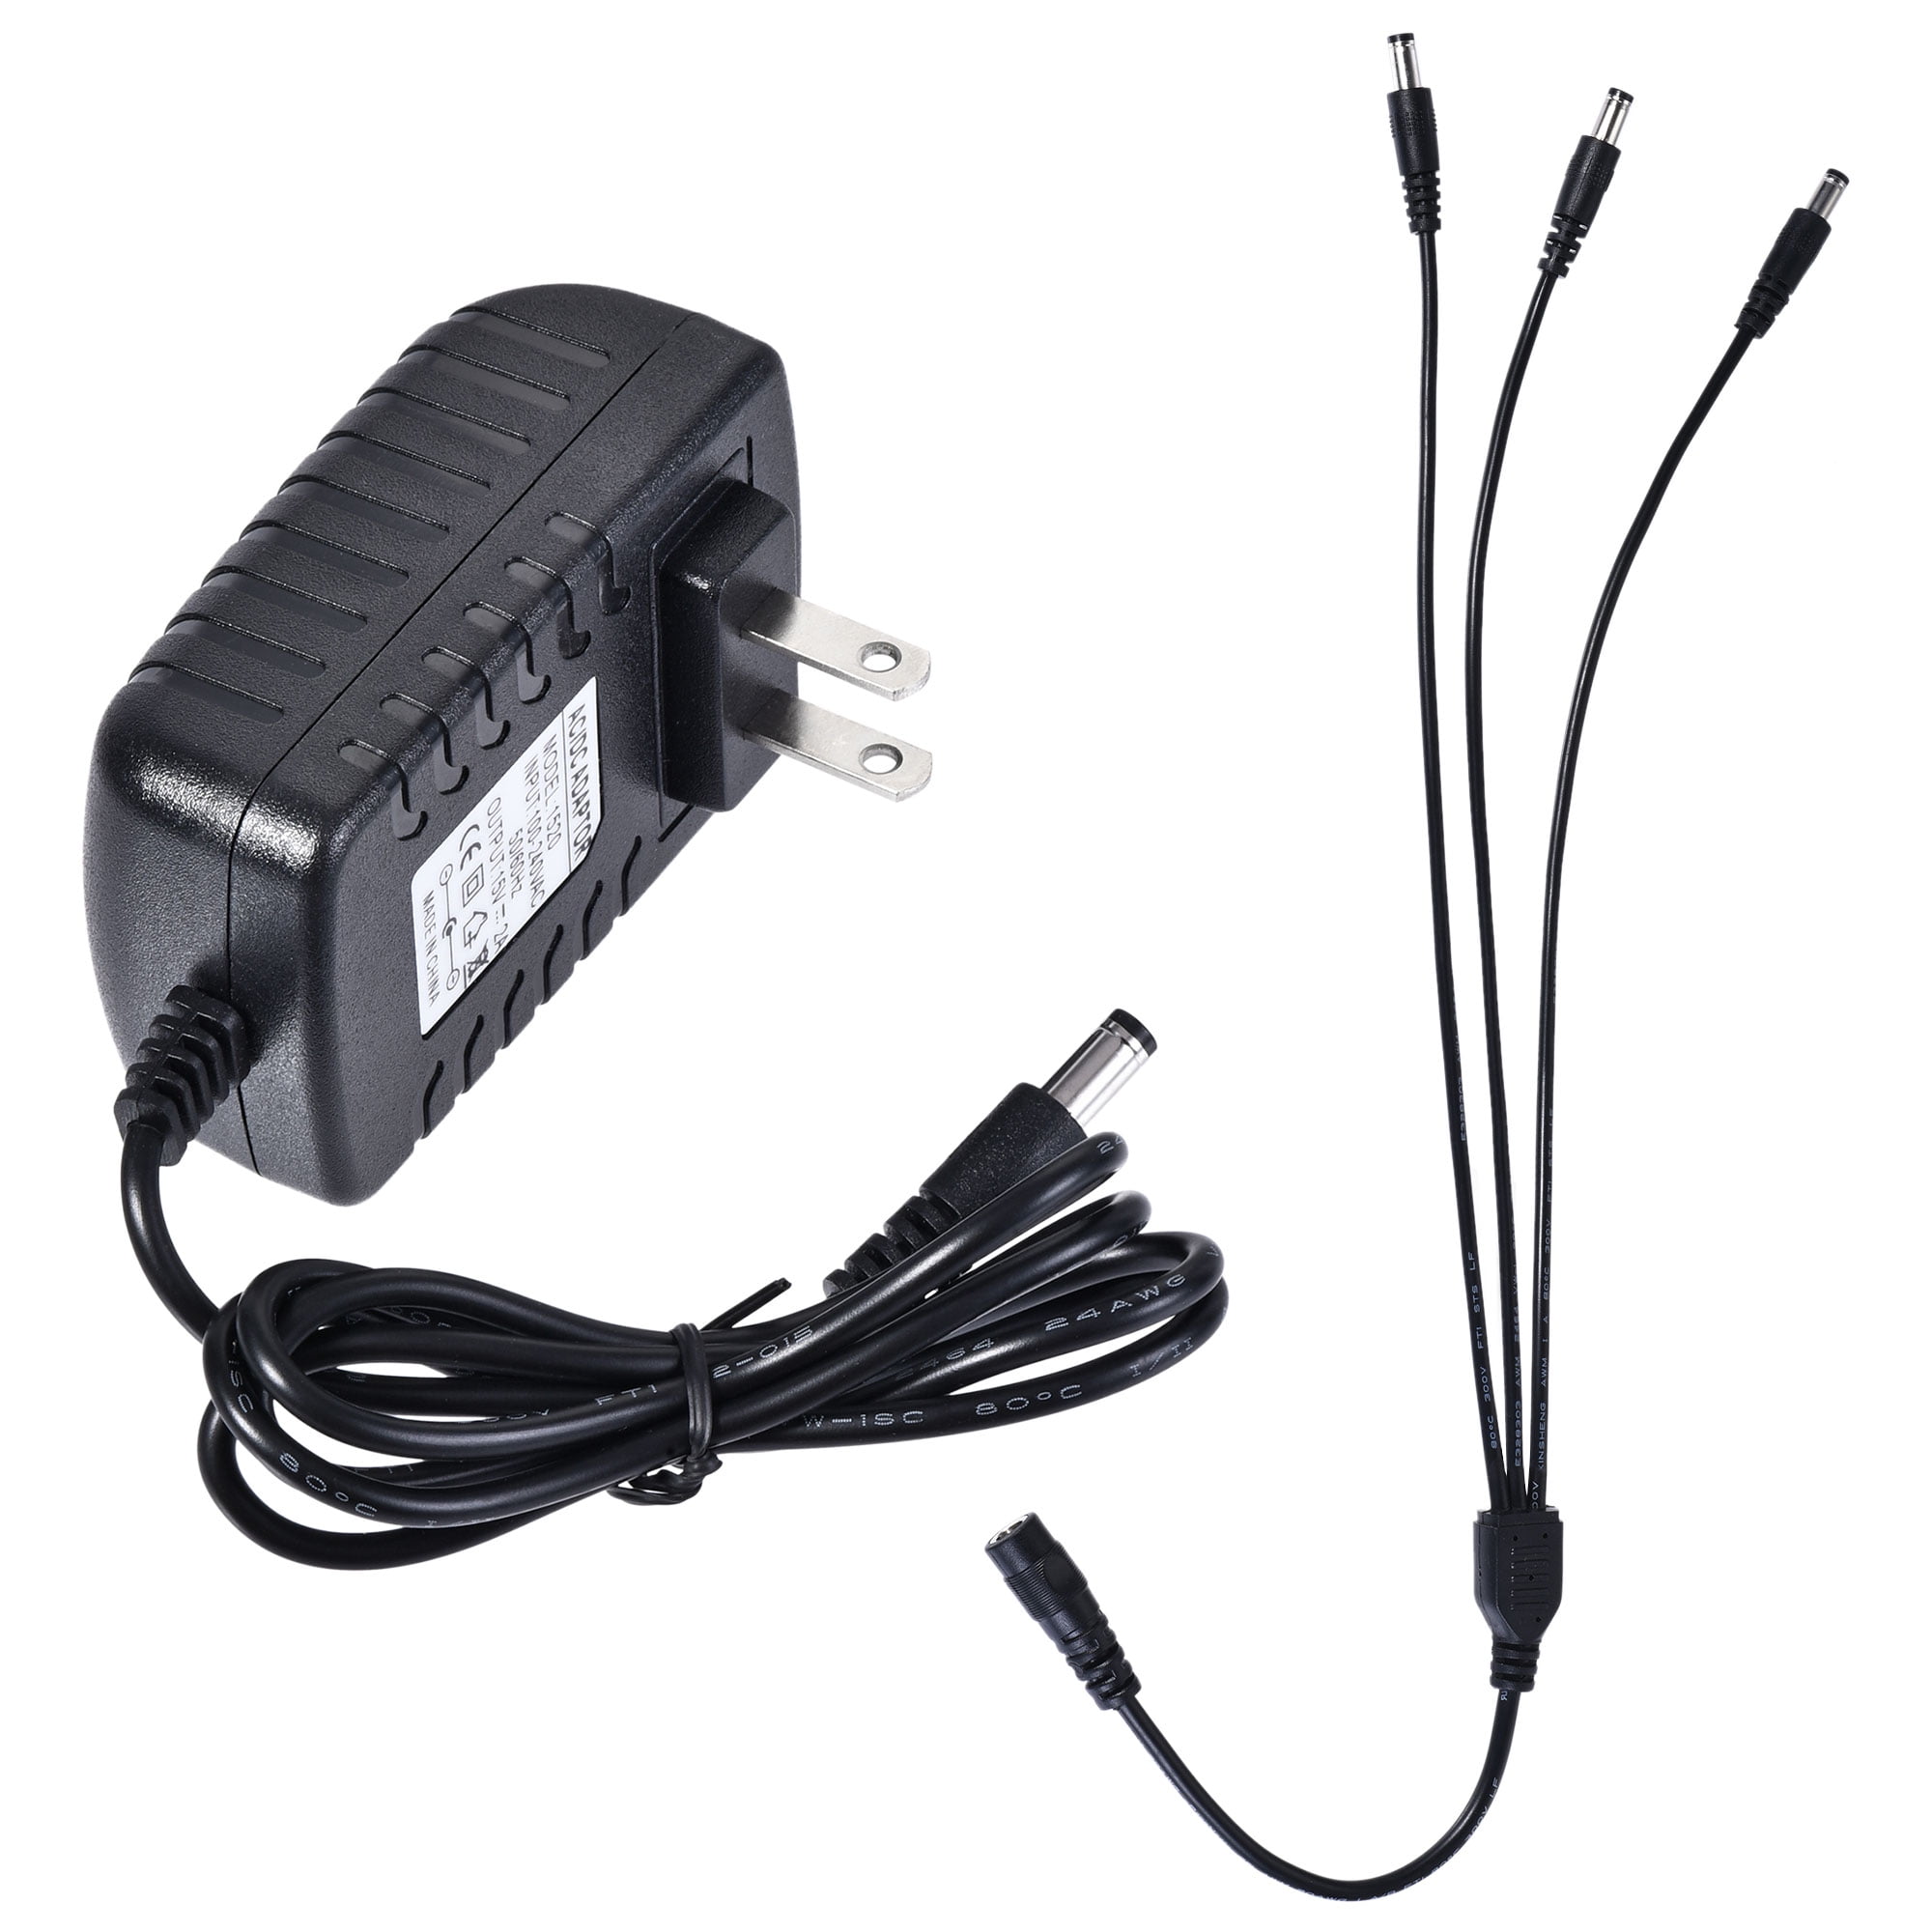 Ac Adapter 15V 2A DC Power Supply Charger AC 100-240V 50-60Hz to DC 15V 2A 30W Charger Power Supply 15V 30W 2A Ac Adapter Charger with 5.5mm x 2.5mm Plug 